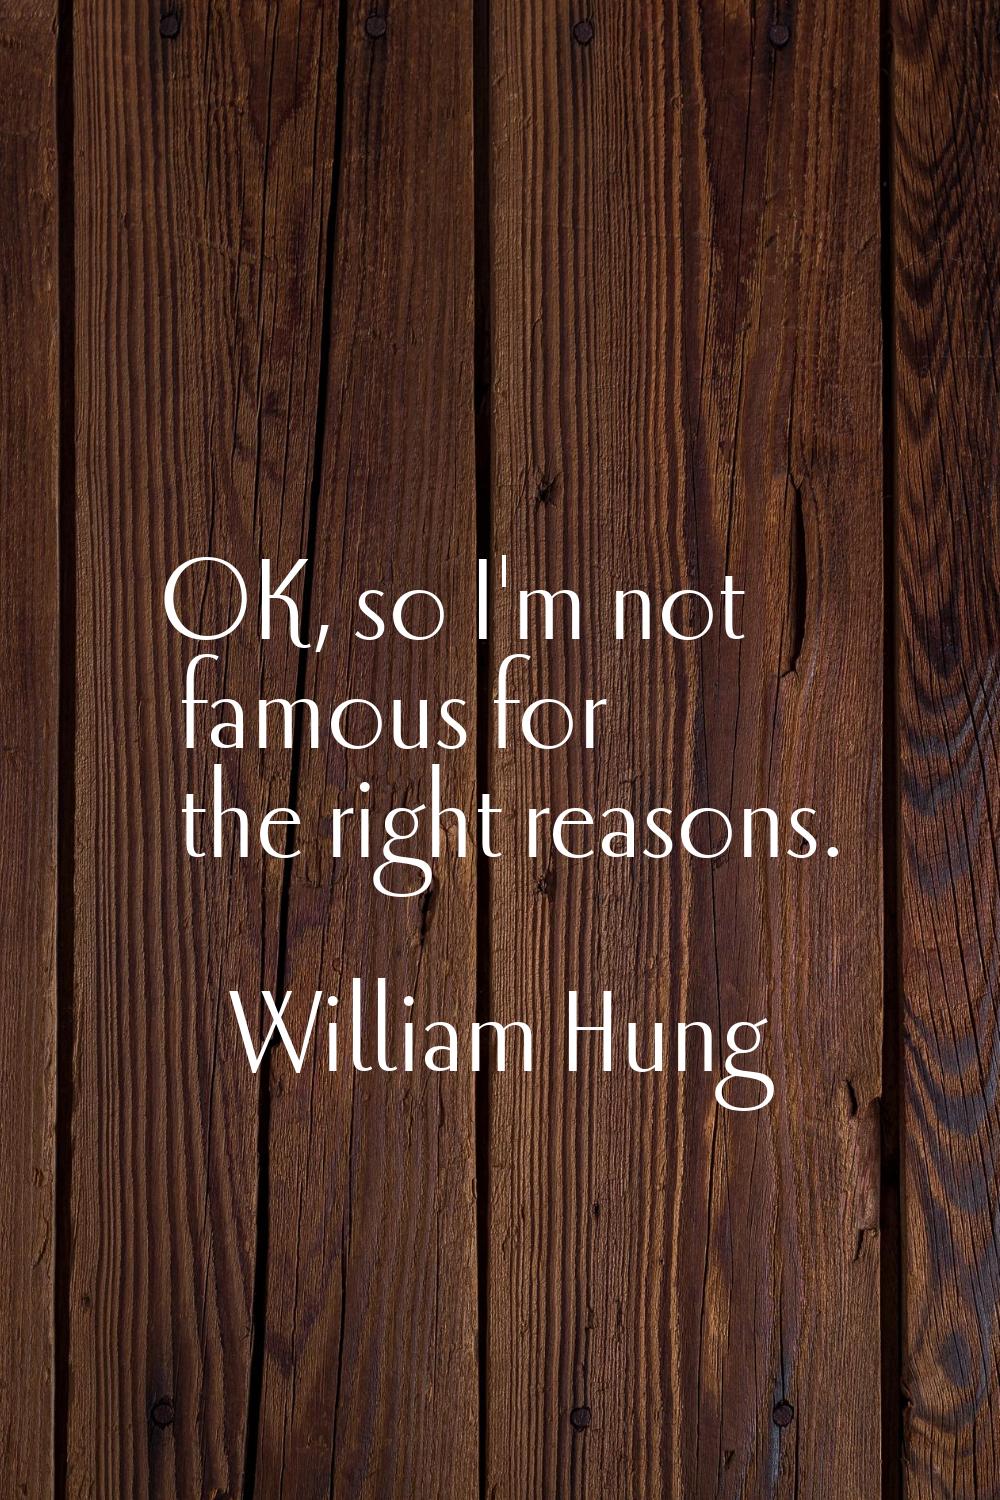 OK, so I'm not famous for the right reasons.